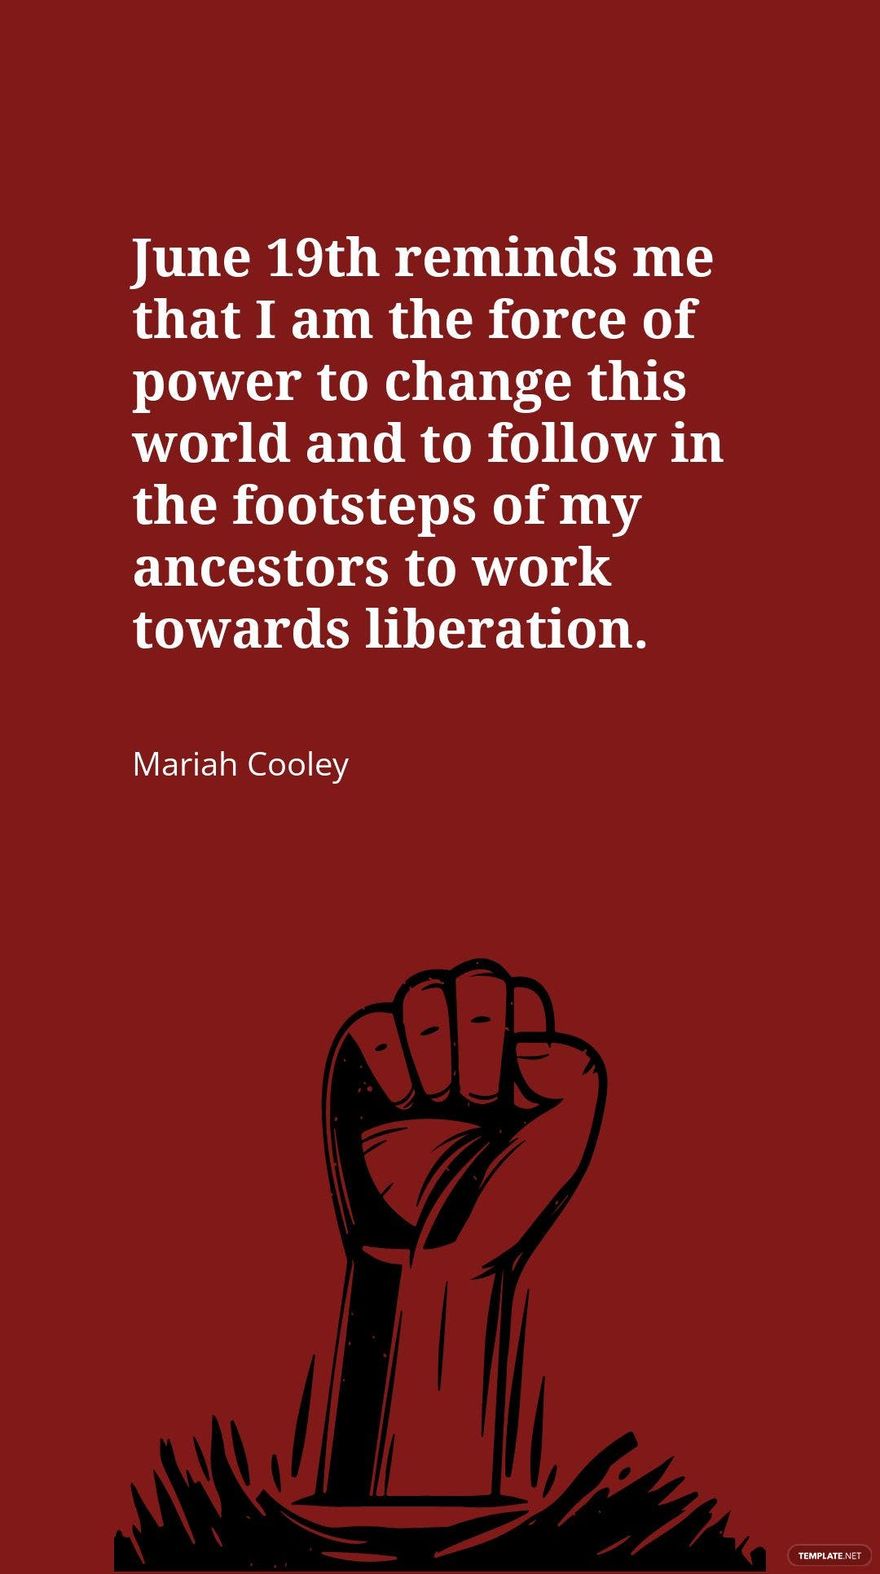 Mariah Cooley - June 19th reminds me that I am the force of power to change this world and to follow in the footsteps of my ancestors to work towards liberation.